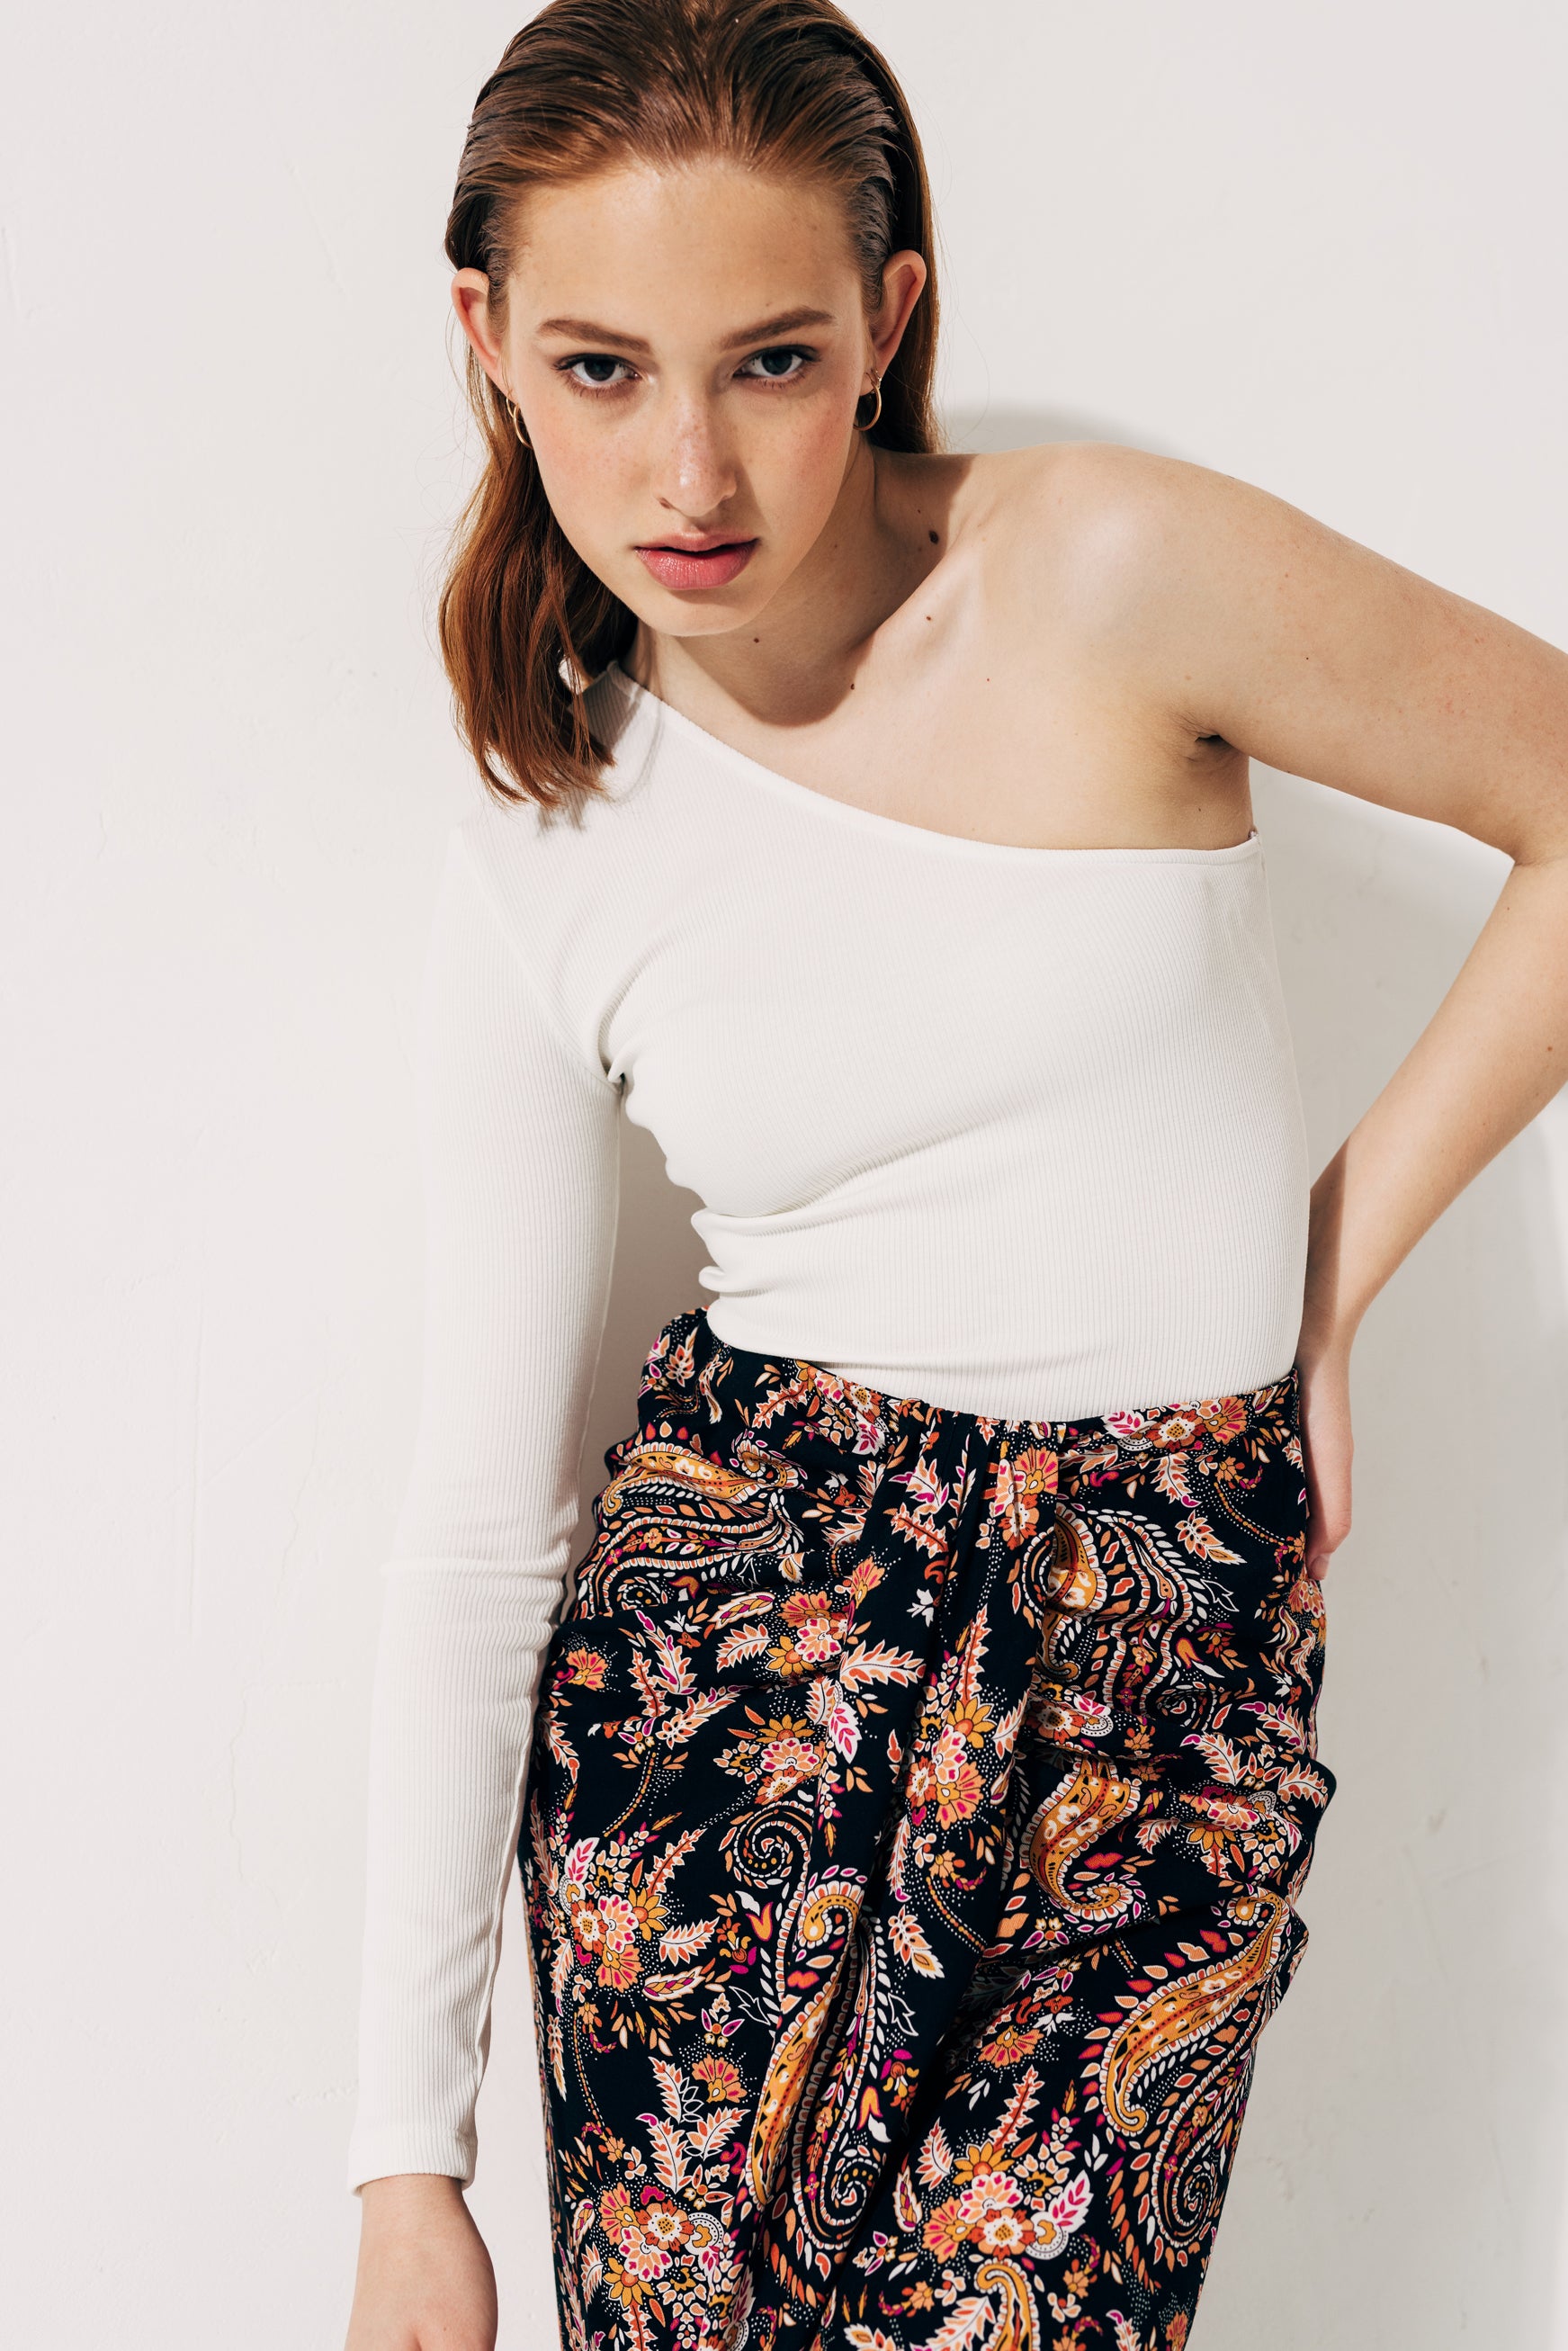 100% Viscose high-waist midi skirt with front knot and slit in paisley print